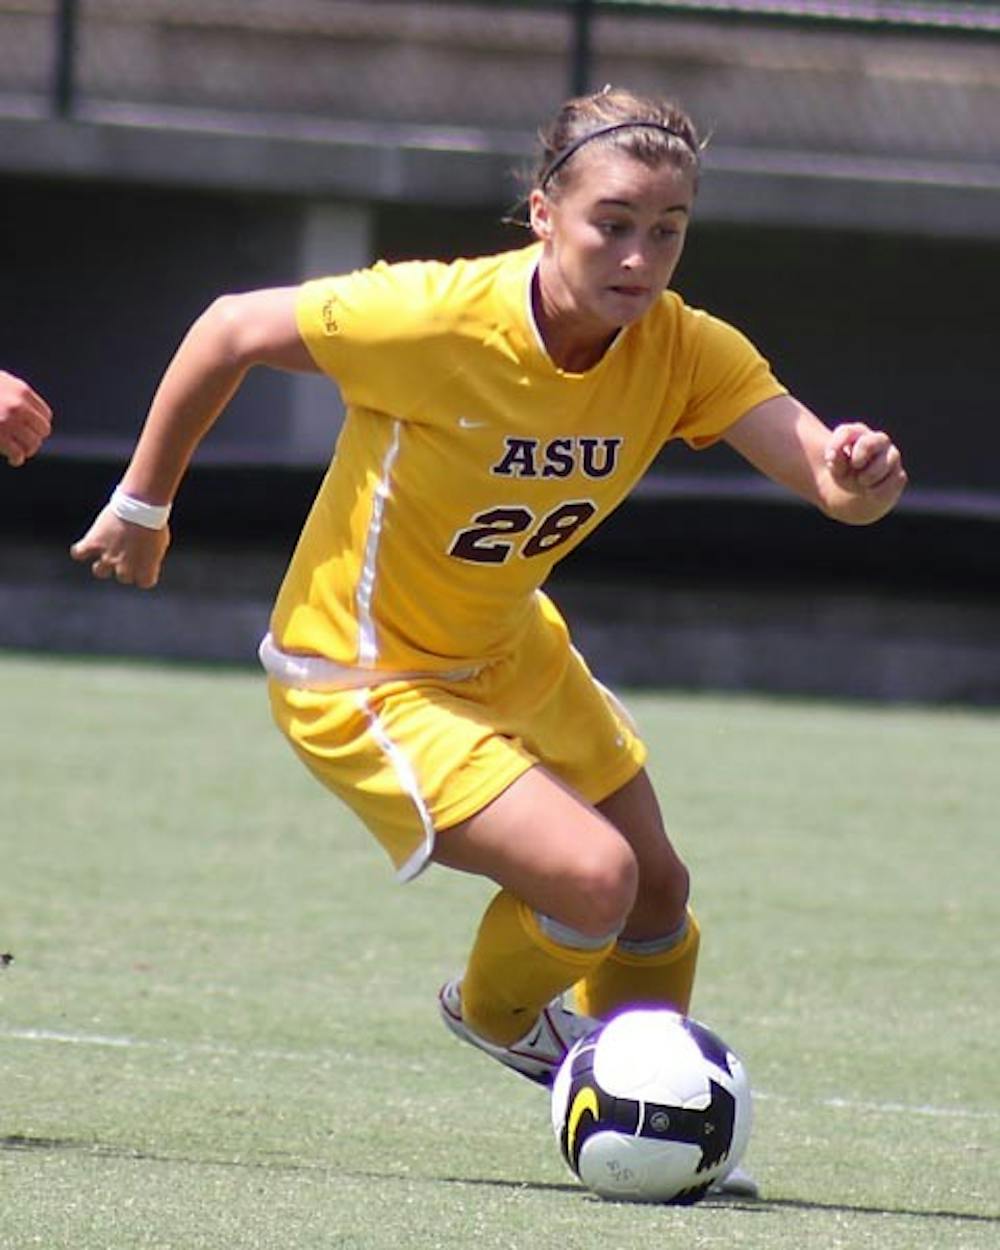 SHUT OUT: Sophomore midfielder Taylor McCarter drives past defenders during a game earlier this season. ASU was held scoreless over the weekend, losing to Long Beach State and drawing with Pepperdine. (Photo by Steve Rodriguez, ASU Media Realtions)